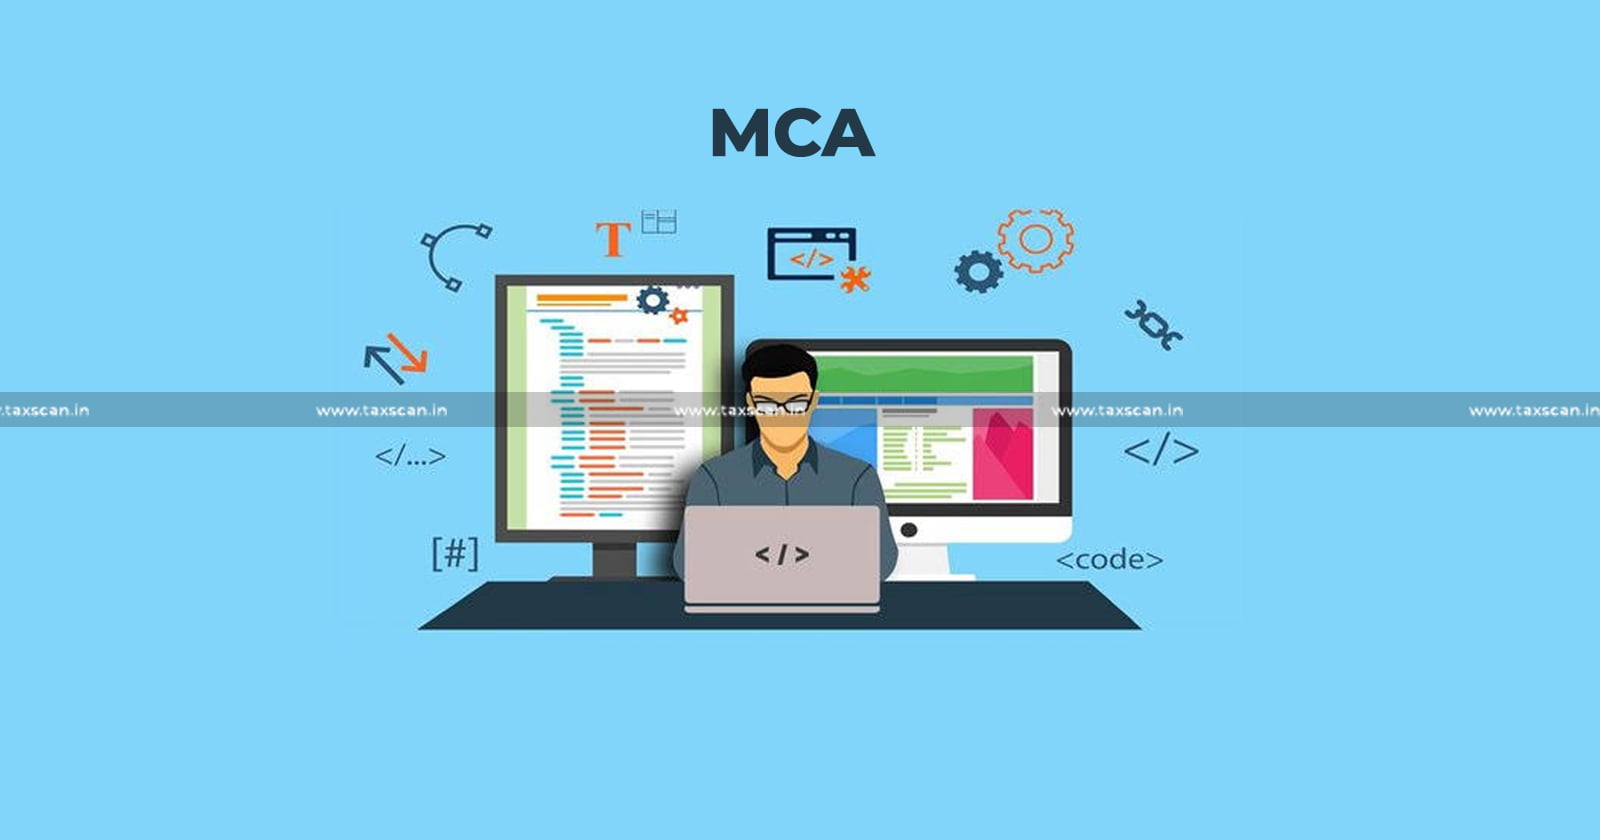 MCA - Portal Issues - MCA21 - Ministry of Corporate Affairs - taxscan